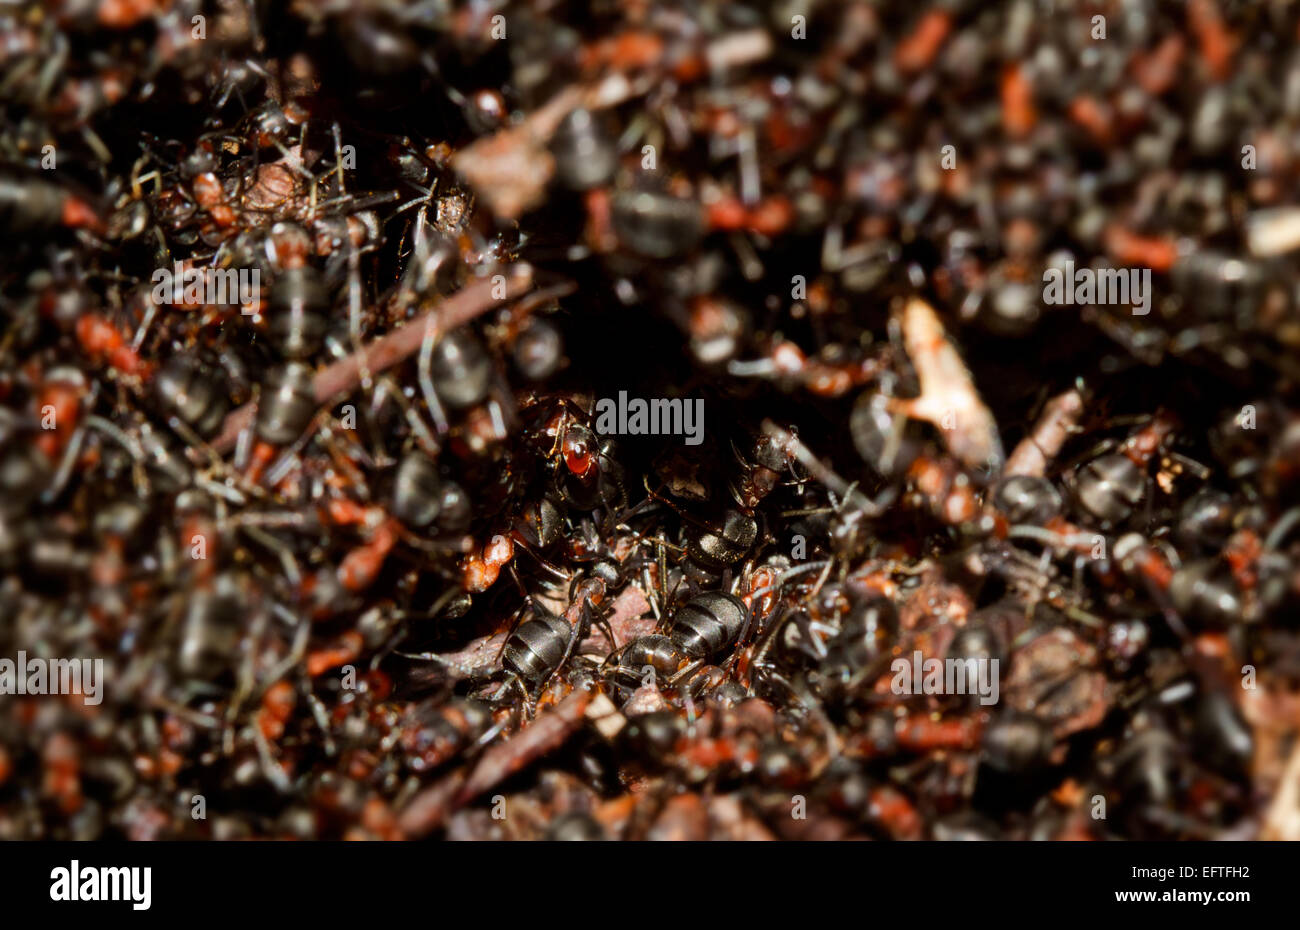 Hundreds of European red wood ants (Formica polyctena) crawling on an anthill in the first sun of early spring. Stock Photo